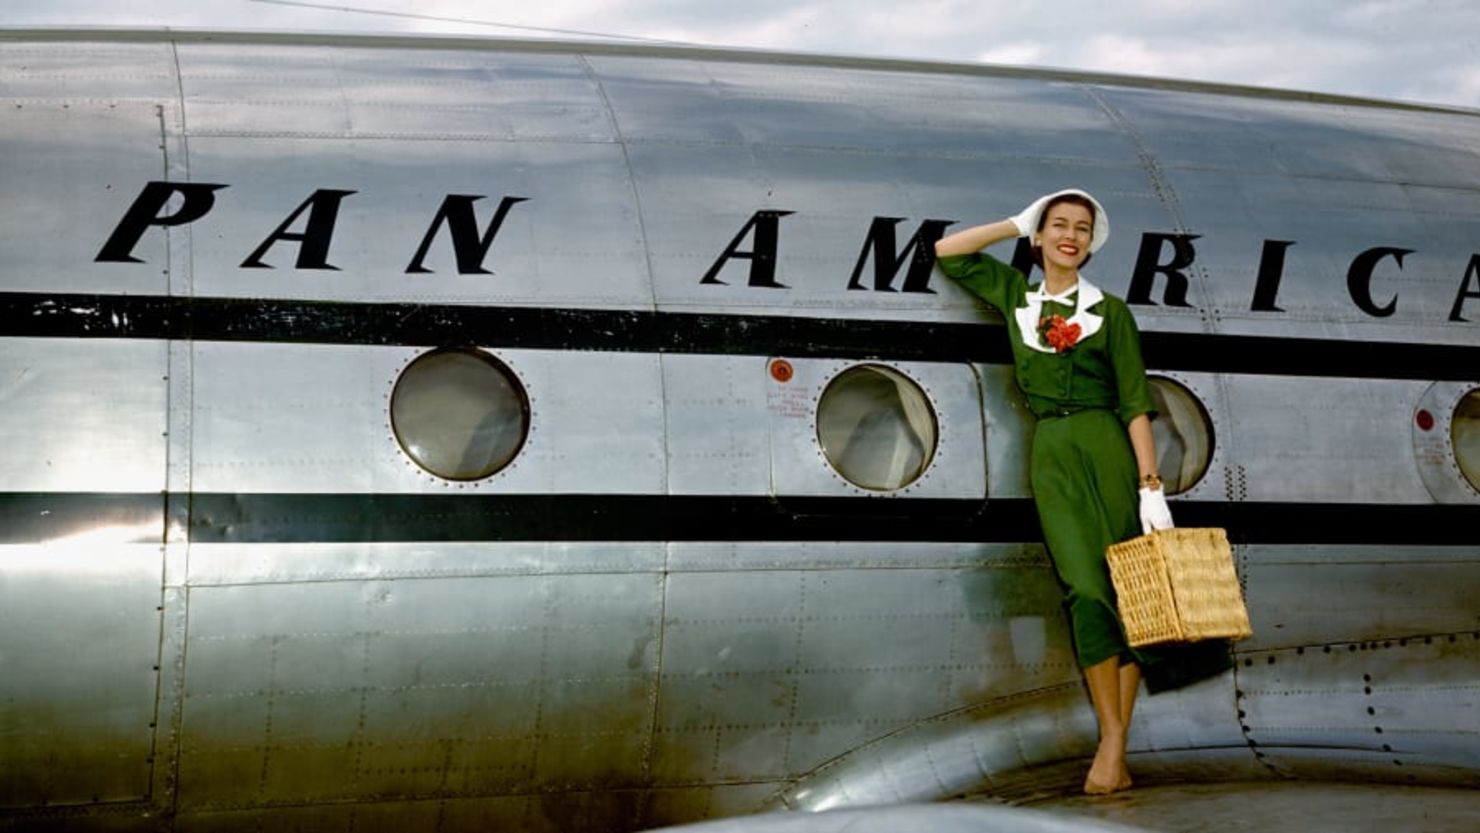 CNNE 1112311 - 211201103201-01-pan-am-airline-photos-restricted